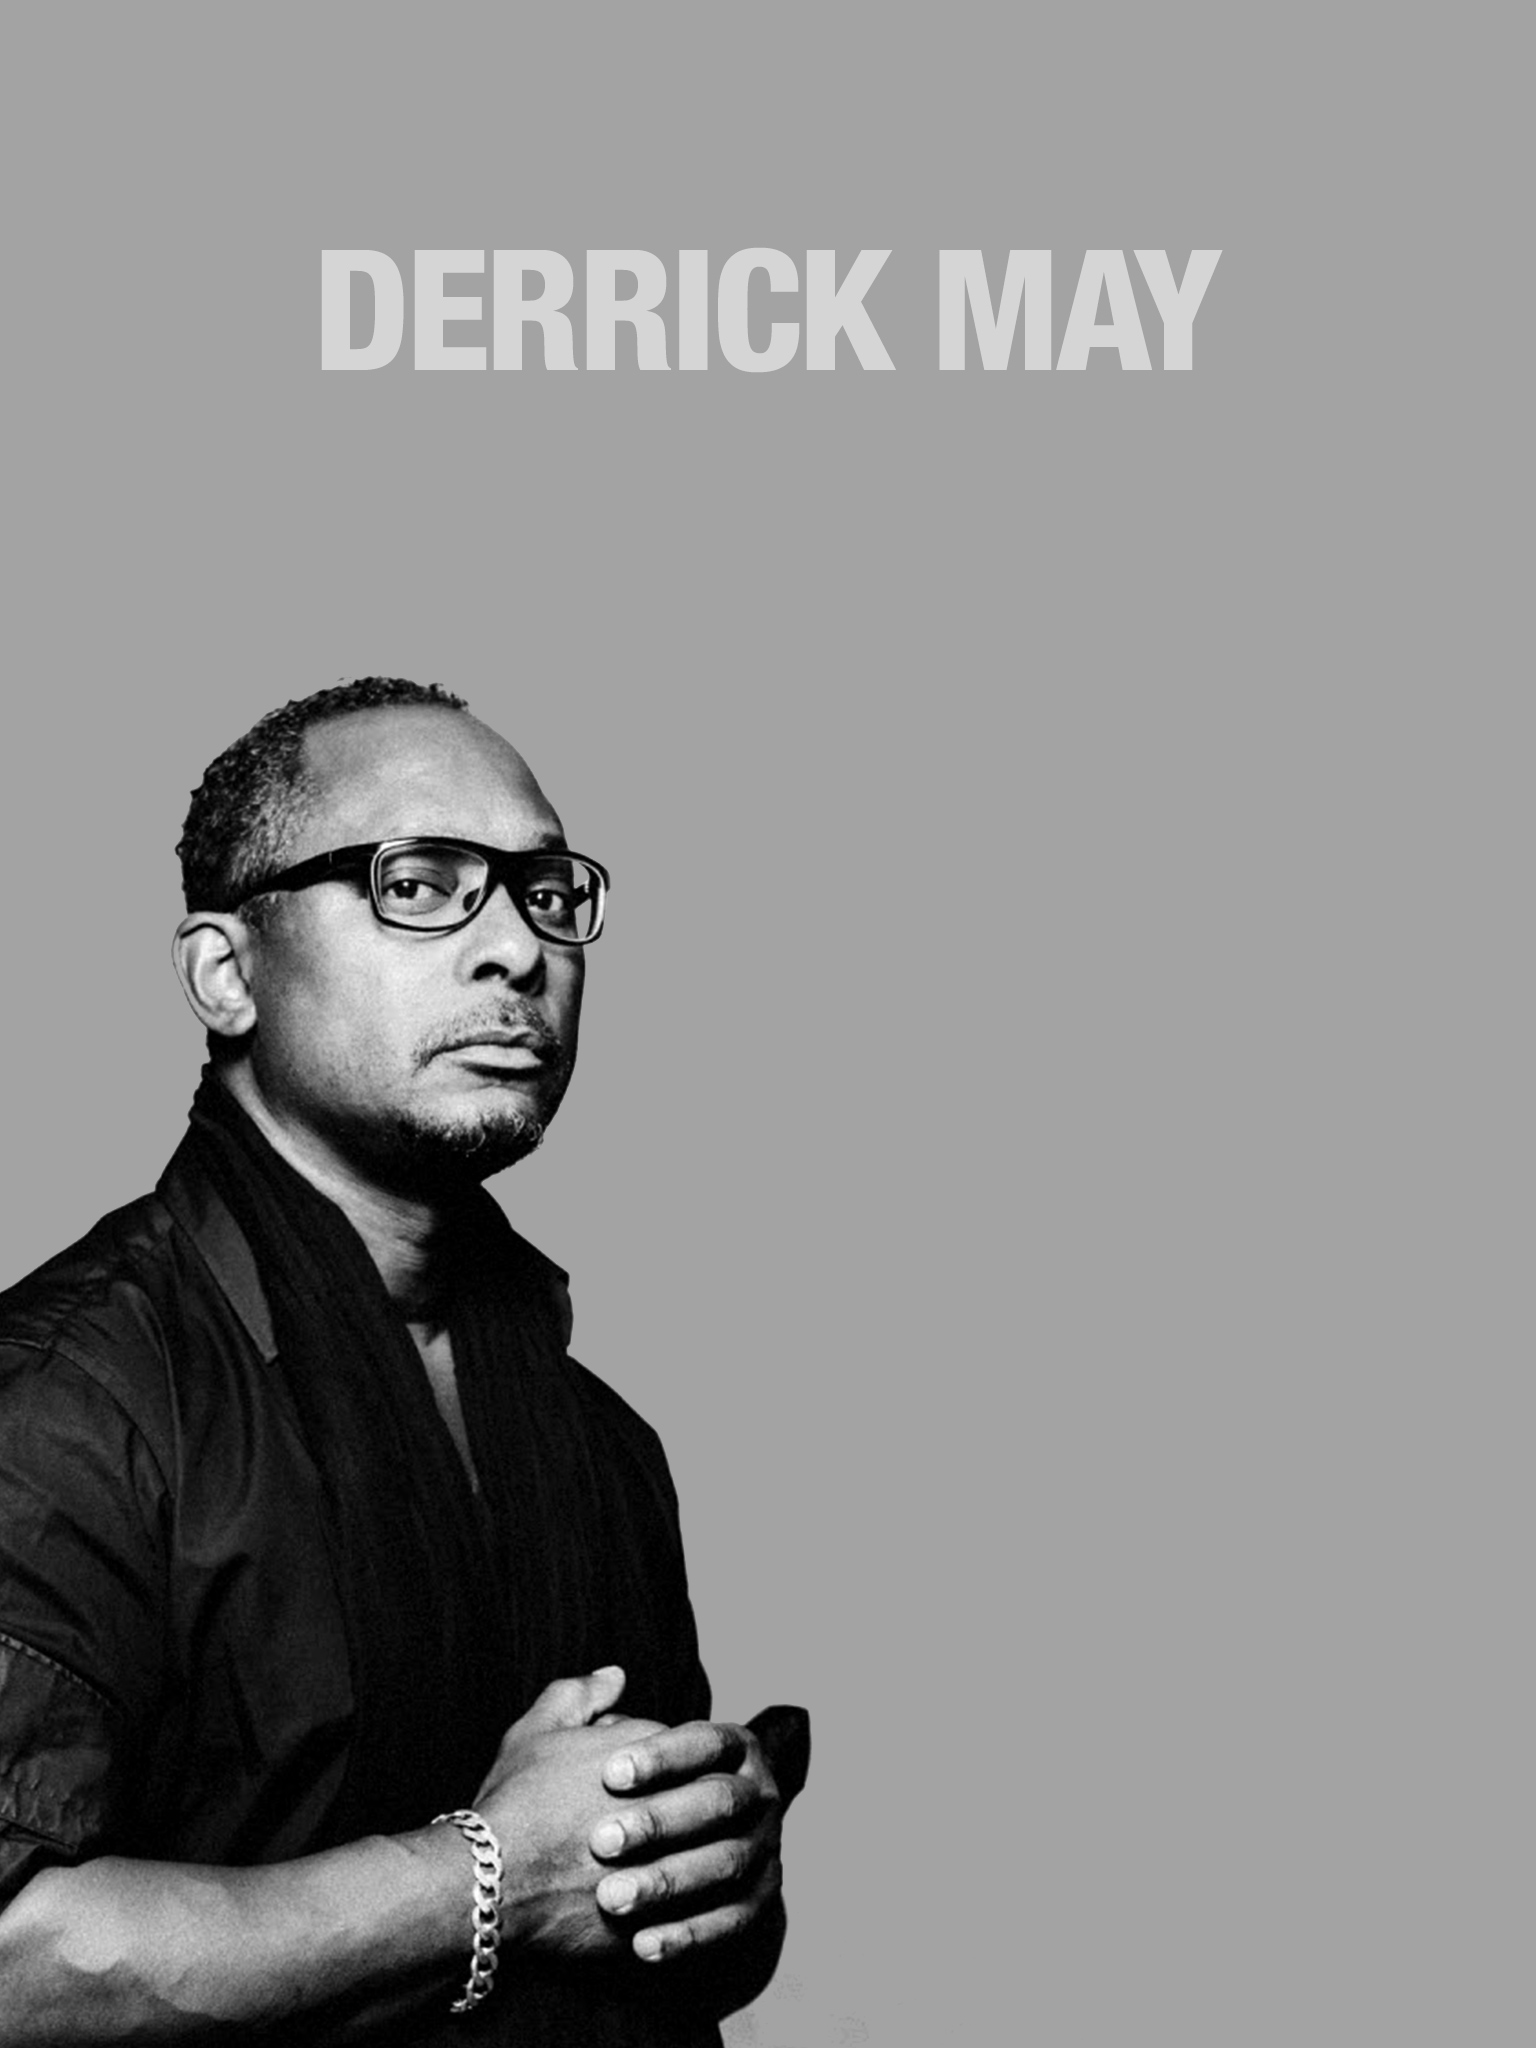 Women provide accounts of sexual harassment and assault by Derrick May